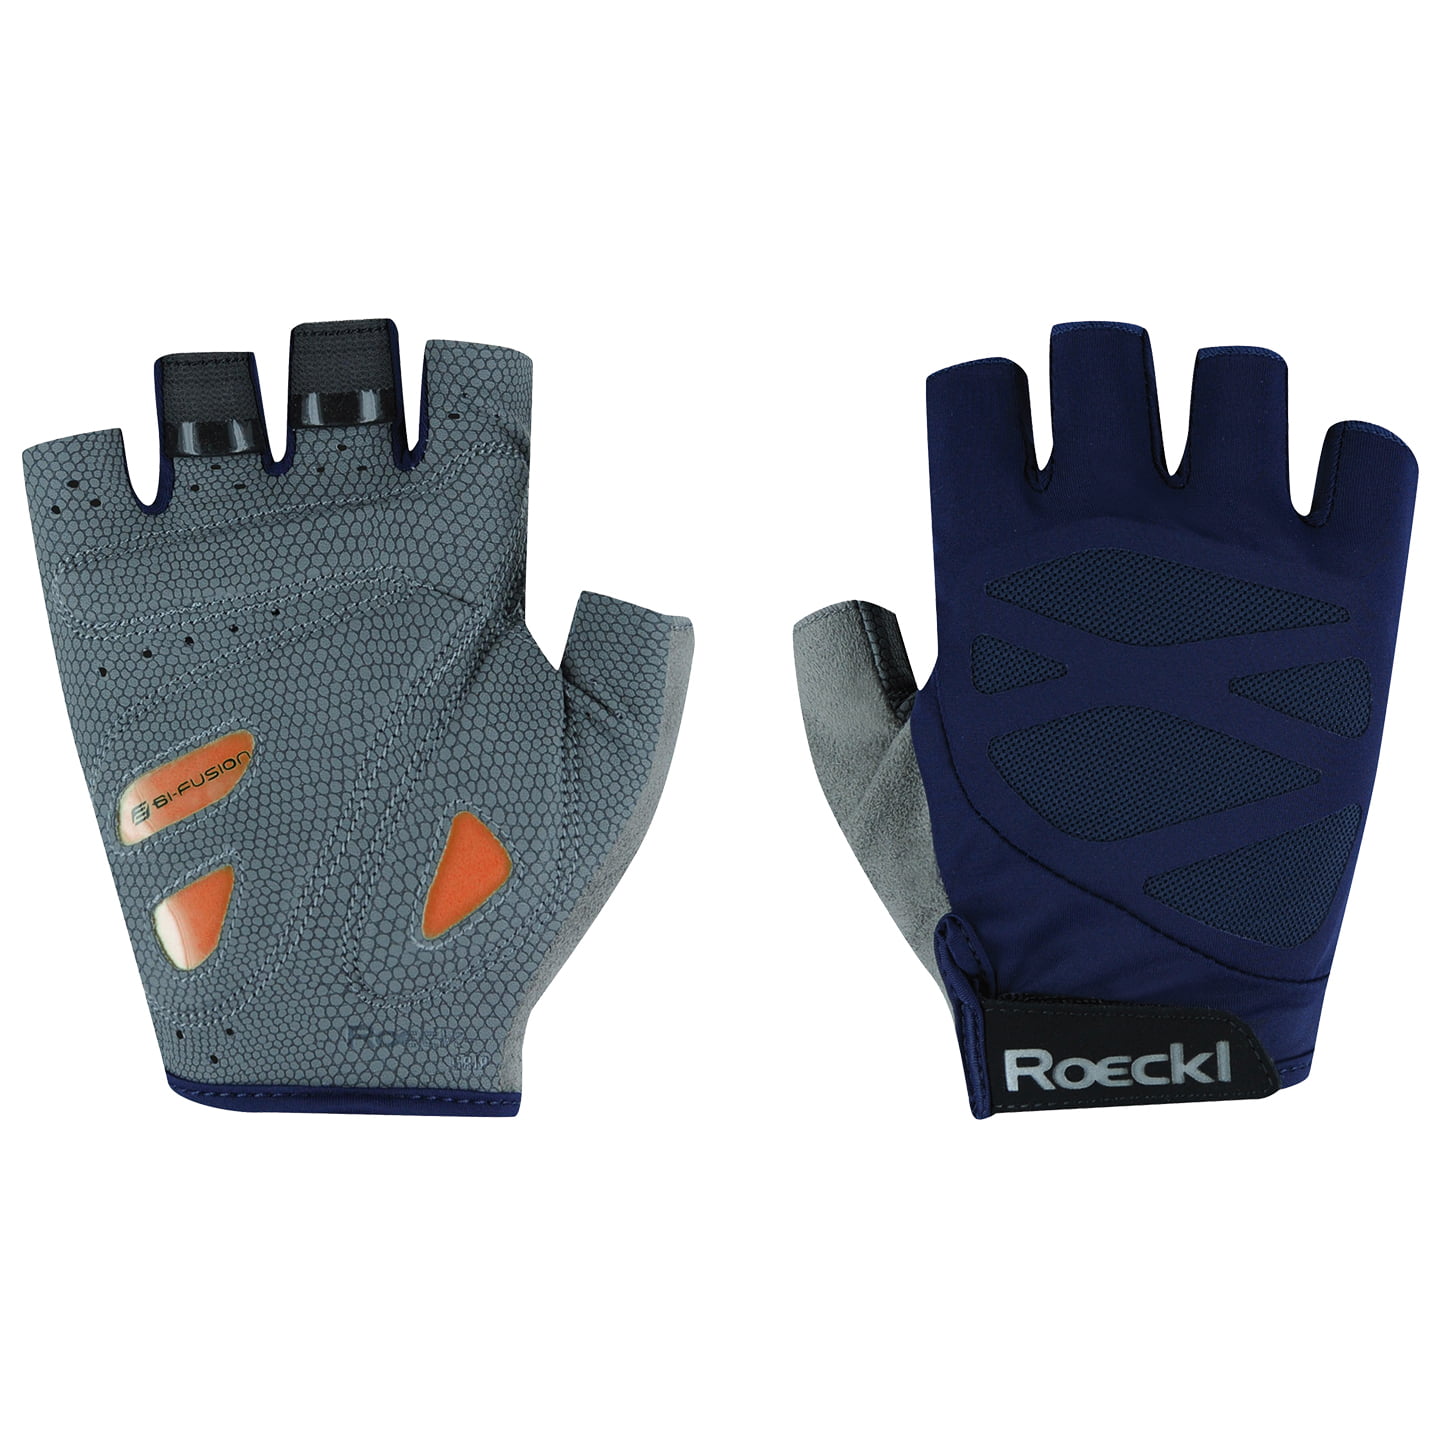 ROECKL Iton Gloves, for men, size 8, Cycle gloves, Cycle clothes